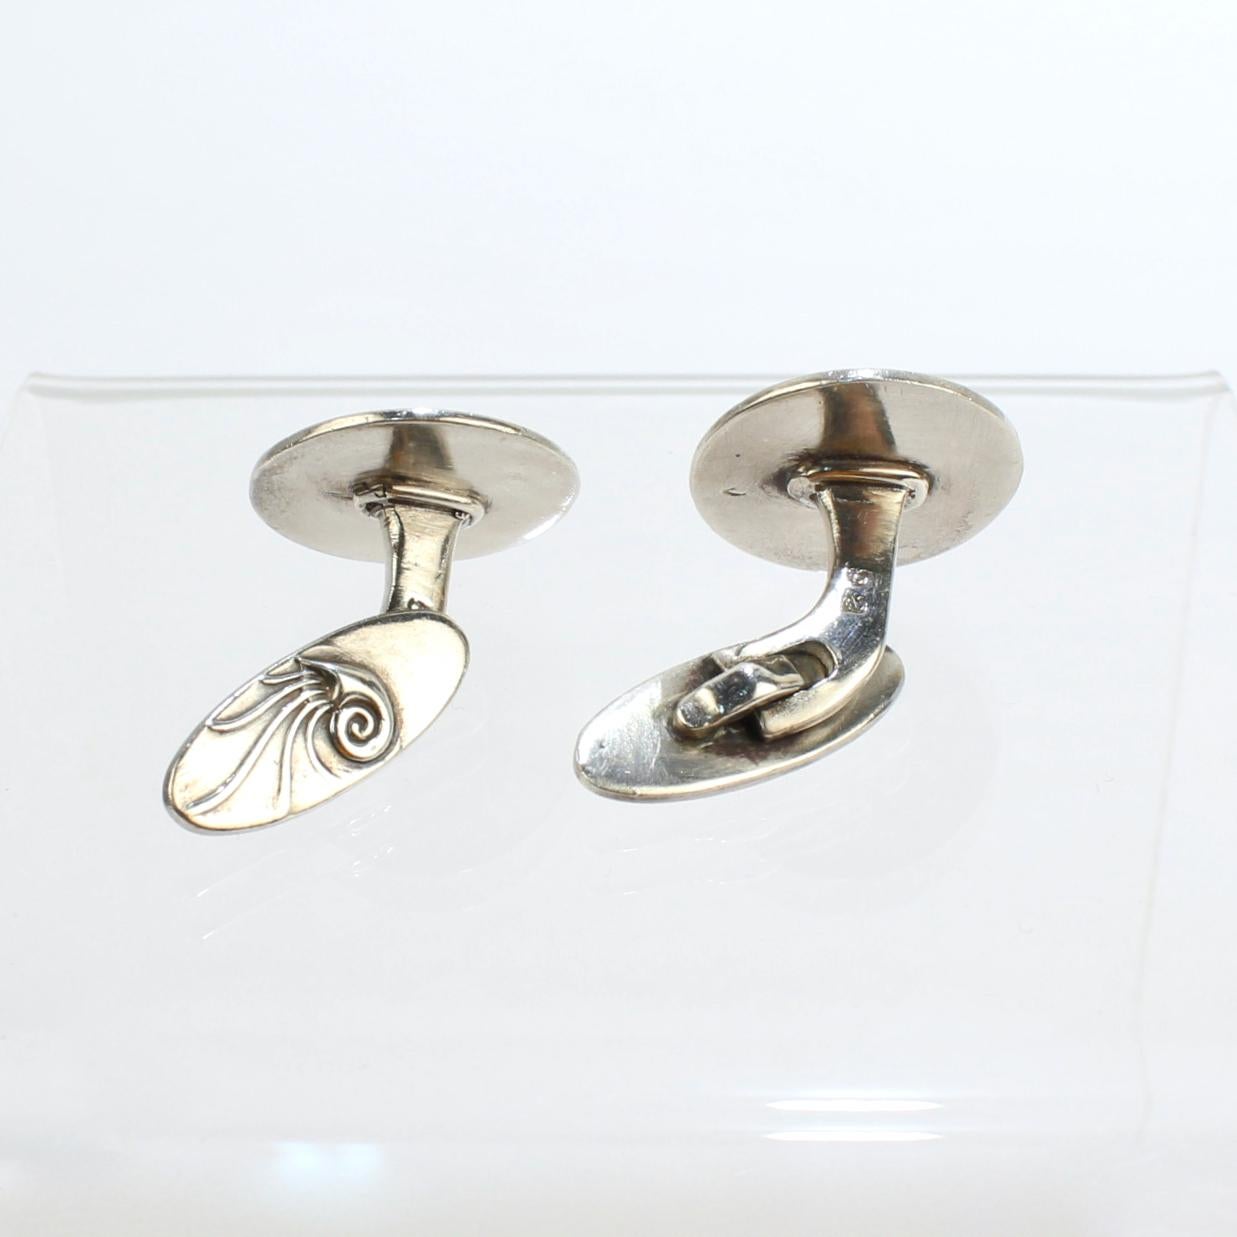 Pair of Georg Jensen Sterling Silver Cufflinks Model No. 52 by Henry Pilstrup In Good Condition For Sale In Philadelphia, PA